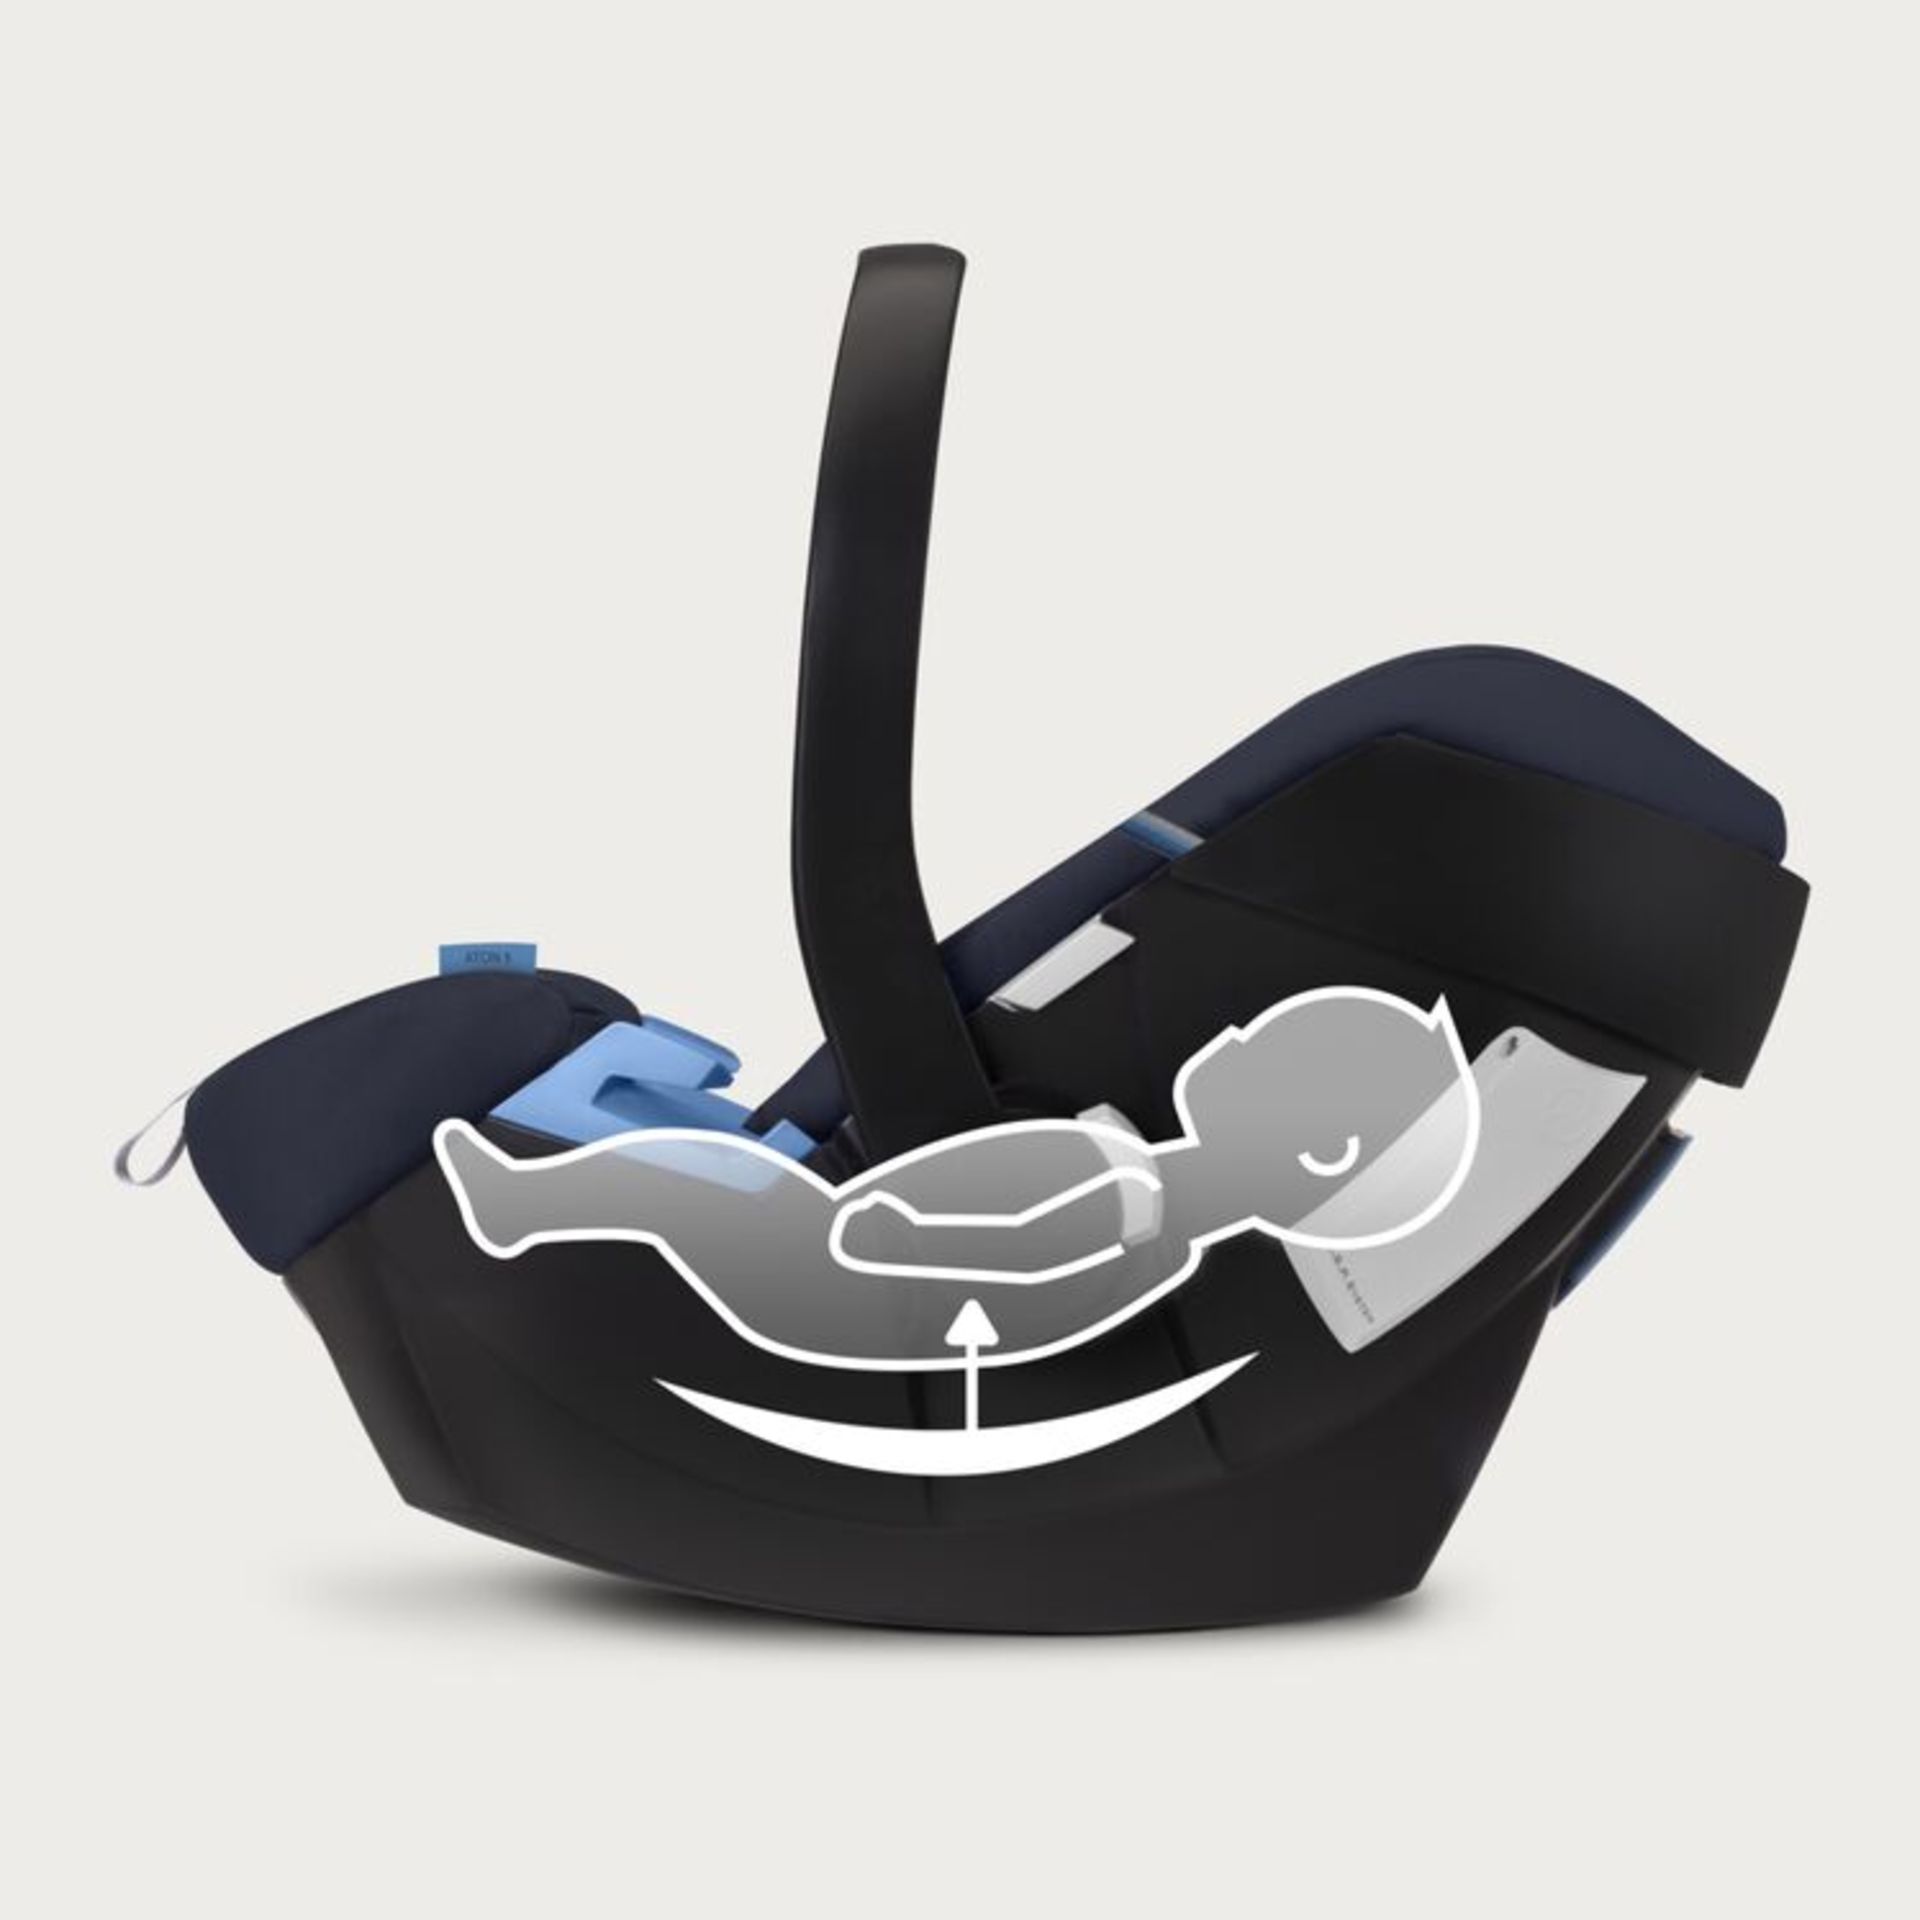 CYBEX ATON 5 INFANT CAR SEAT IN BLACK - RRP £149 - Image 3 of 6